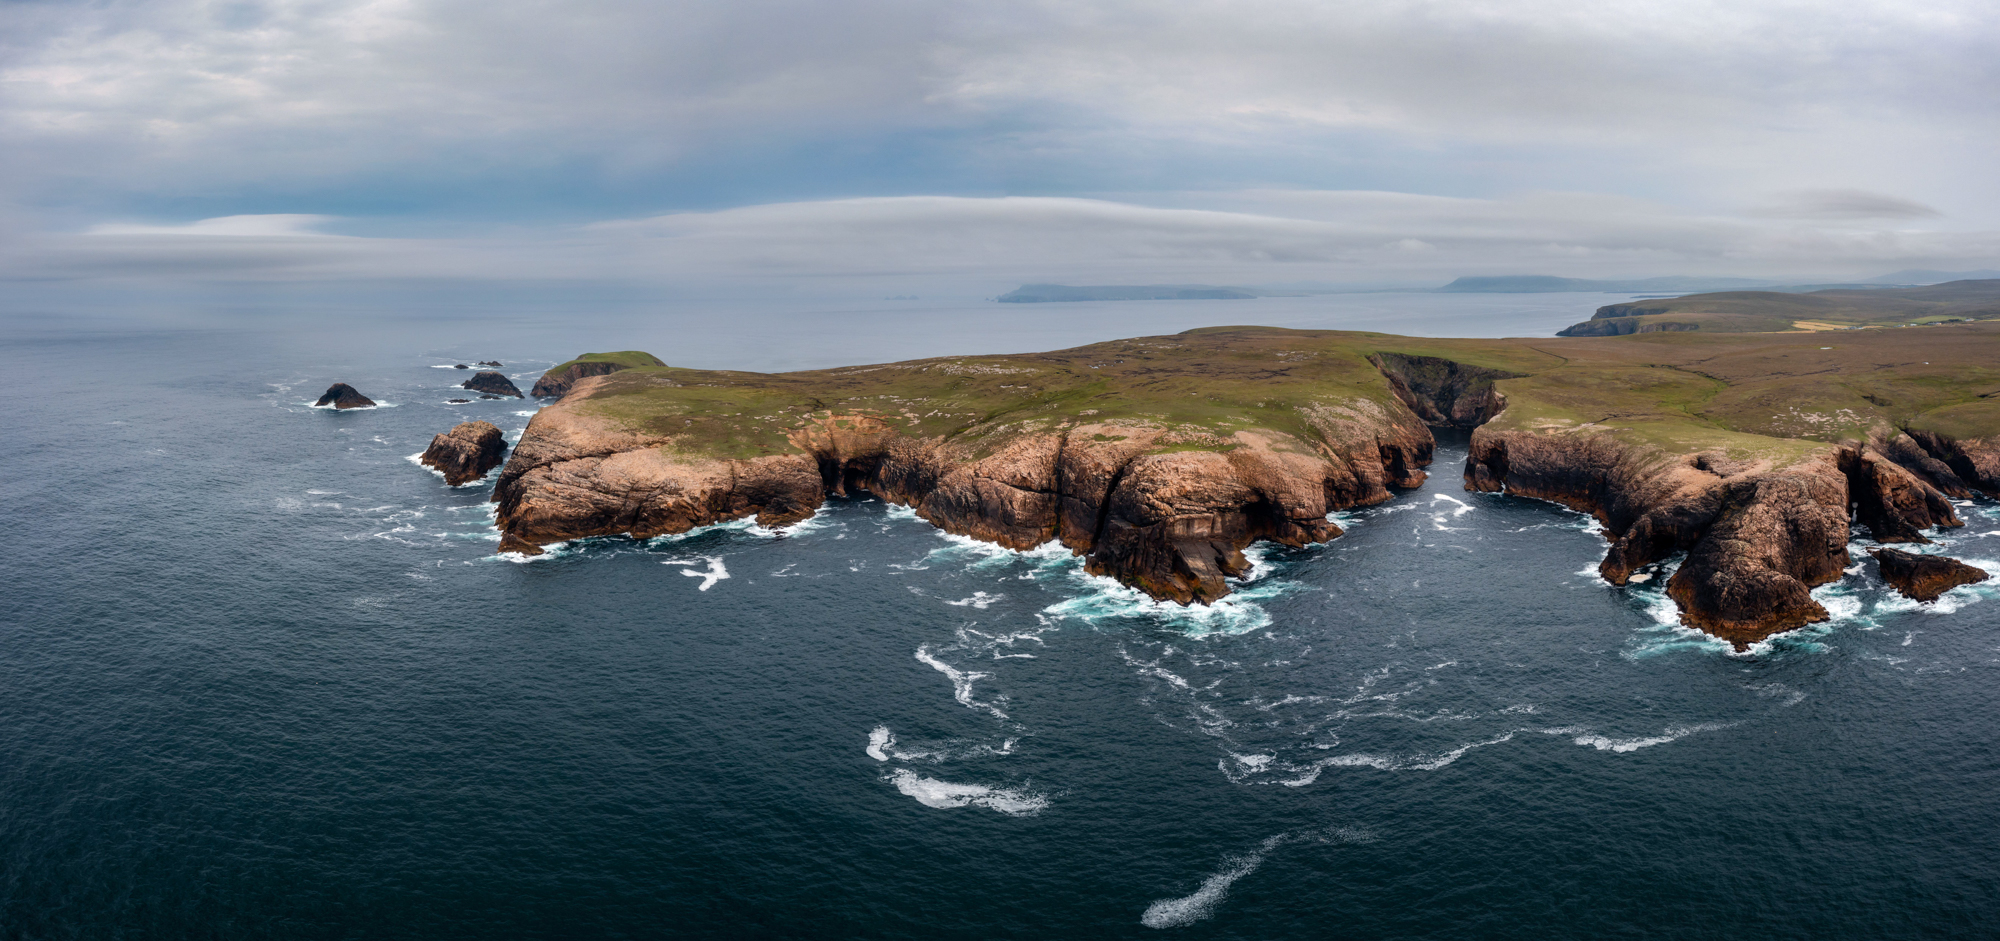 Panorama landscape of the cliffs and wild coast of northern Ireland.